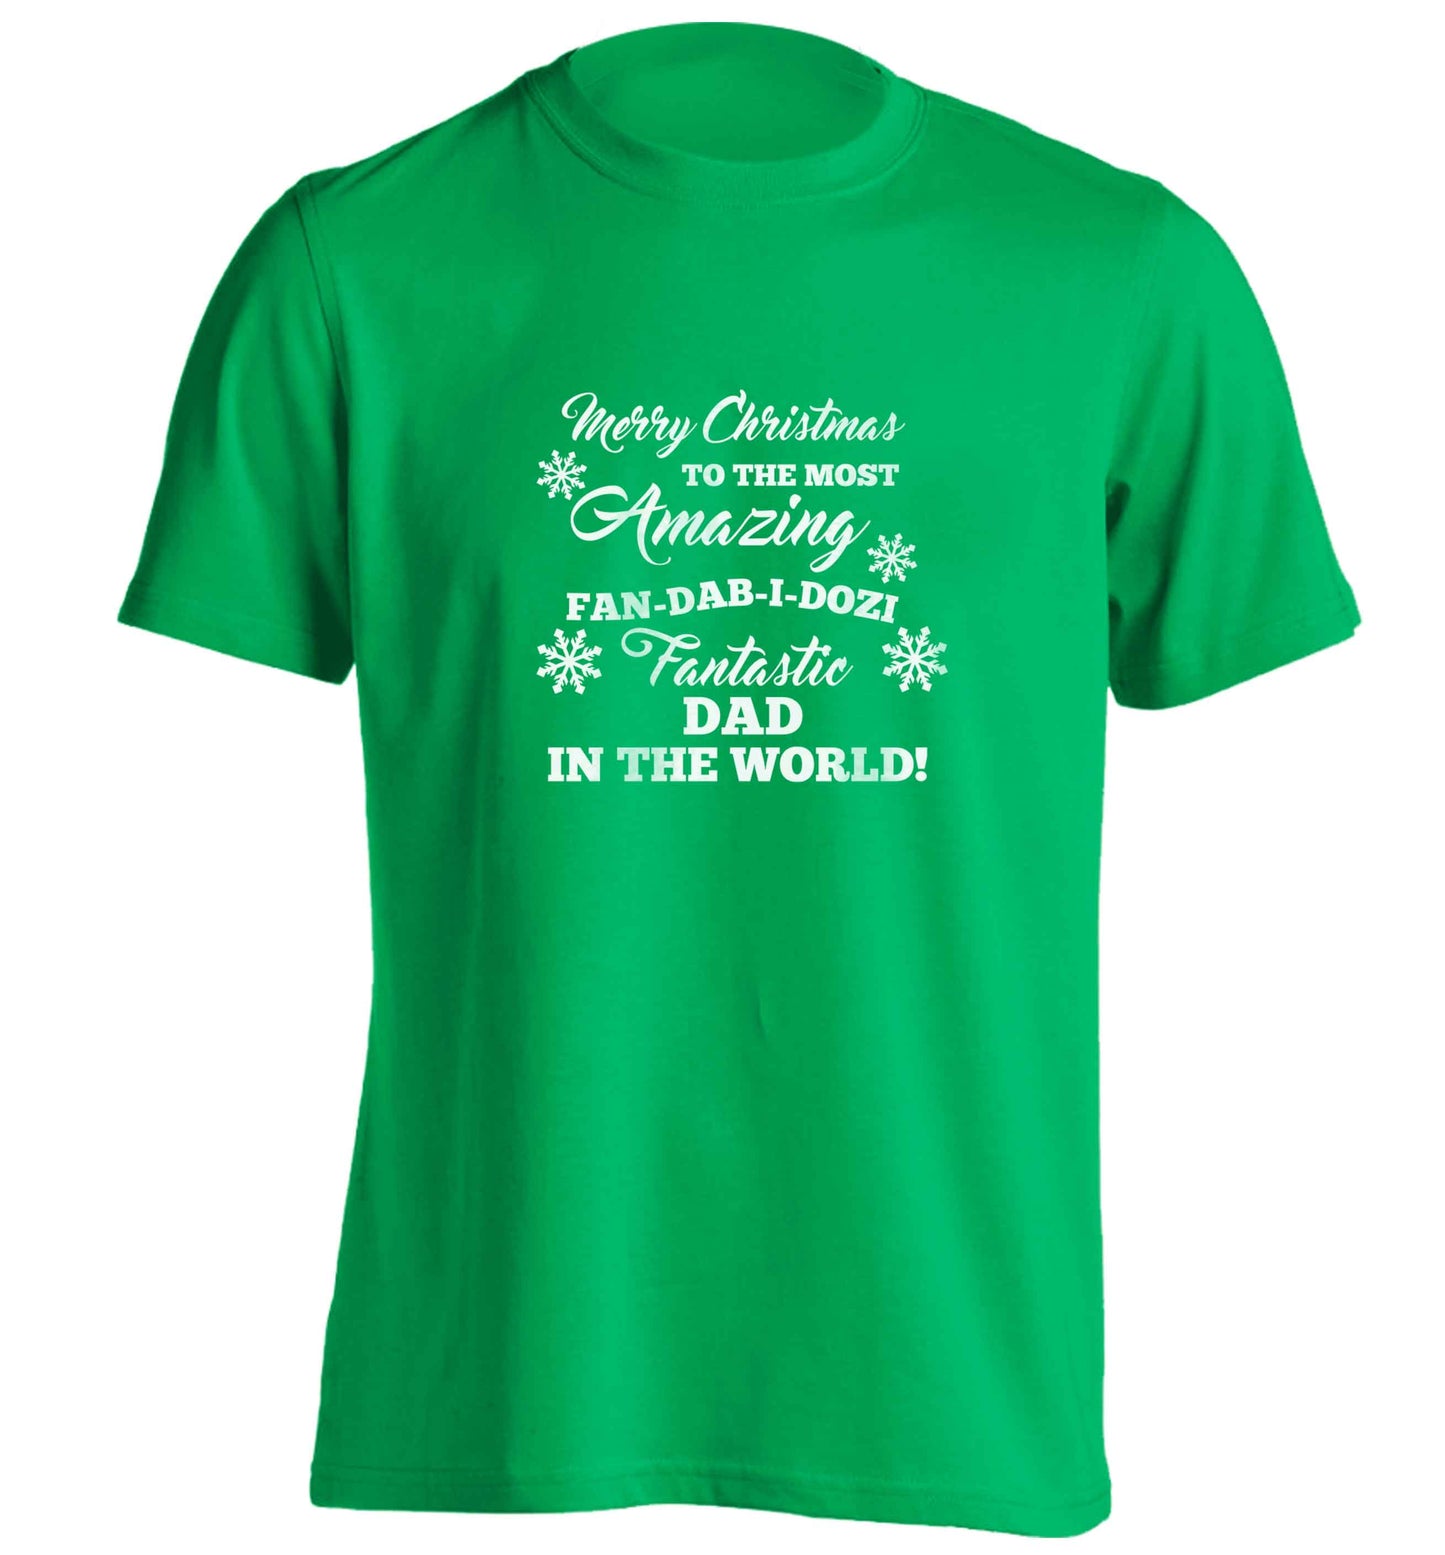 Merry Christmas to the most amazing fan-dab-i-dozi fantasic Dad in the world adults unisex green Tshirt 2XL